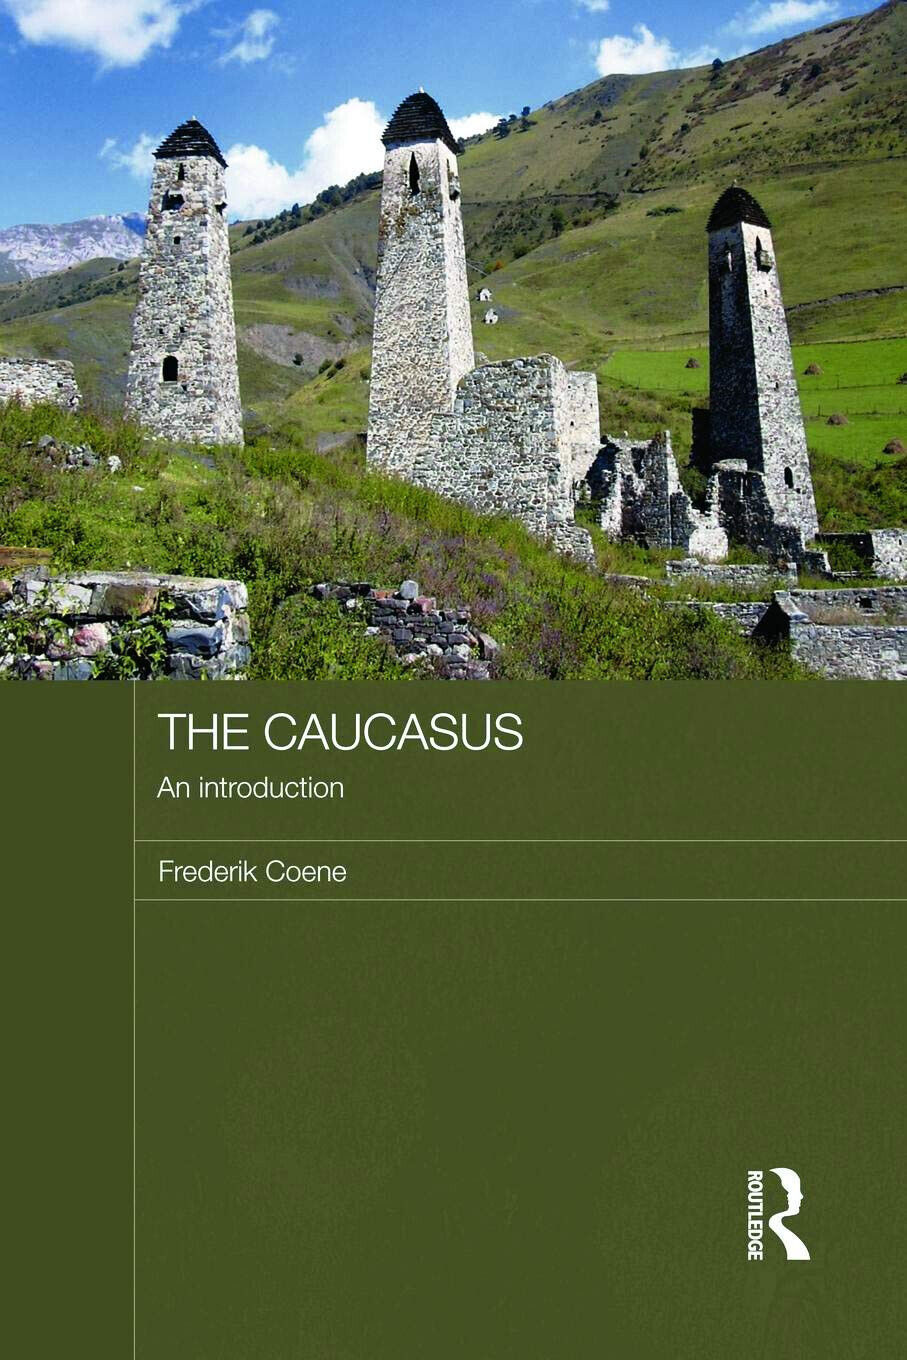 The Caucasus - An Introduction - Frederik Coene - Routledge, 2011